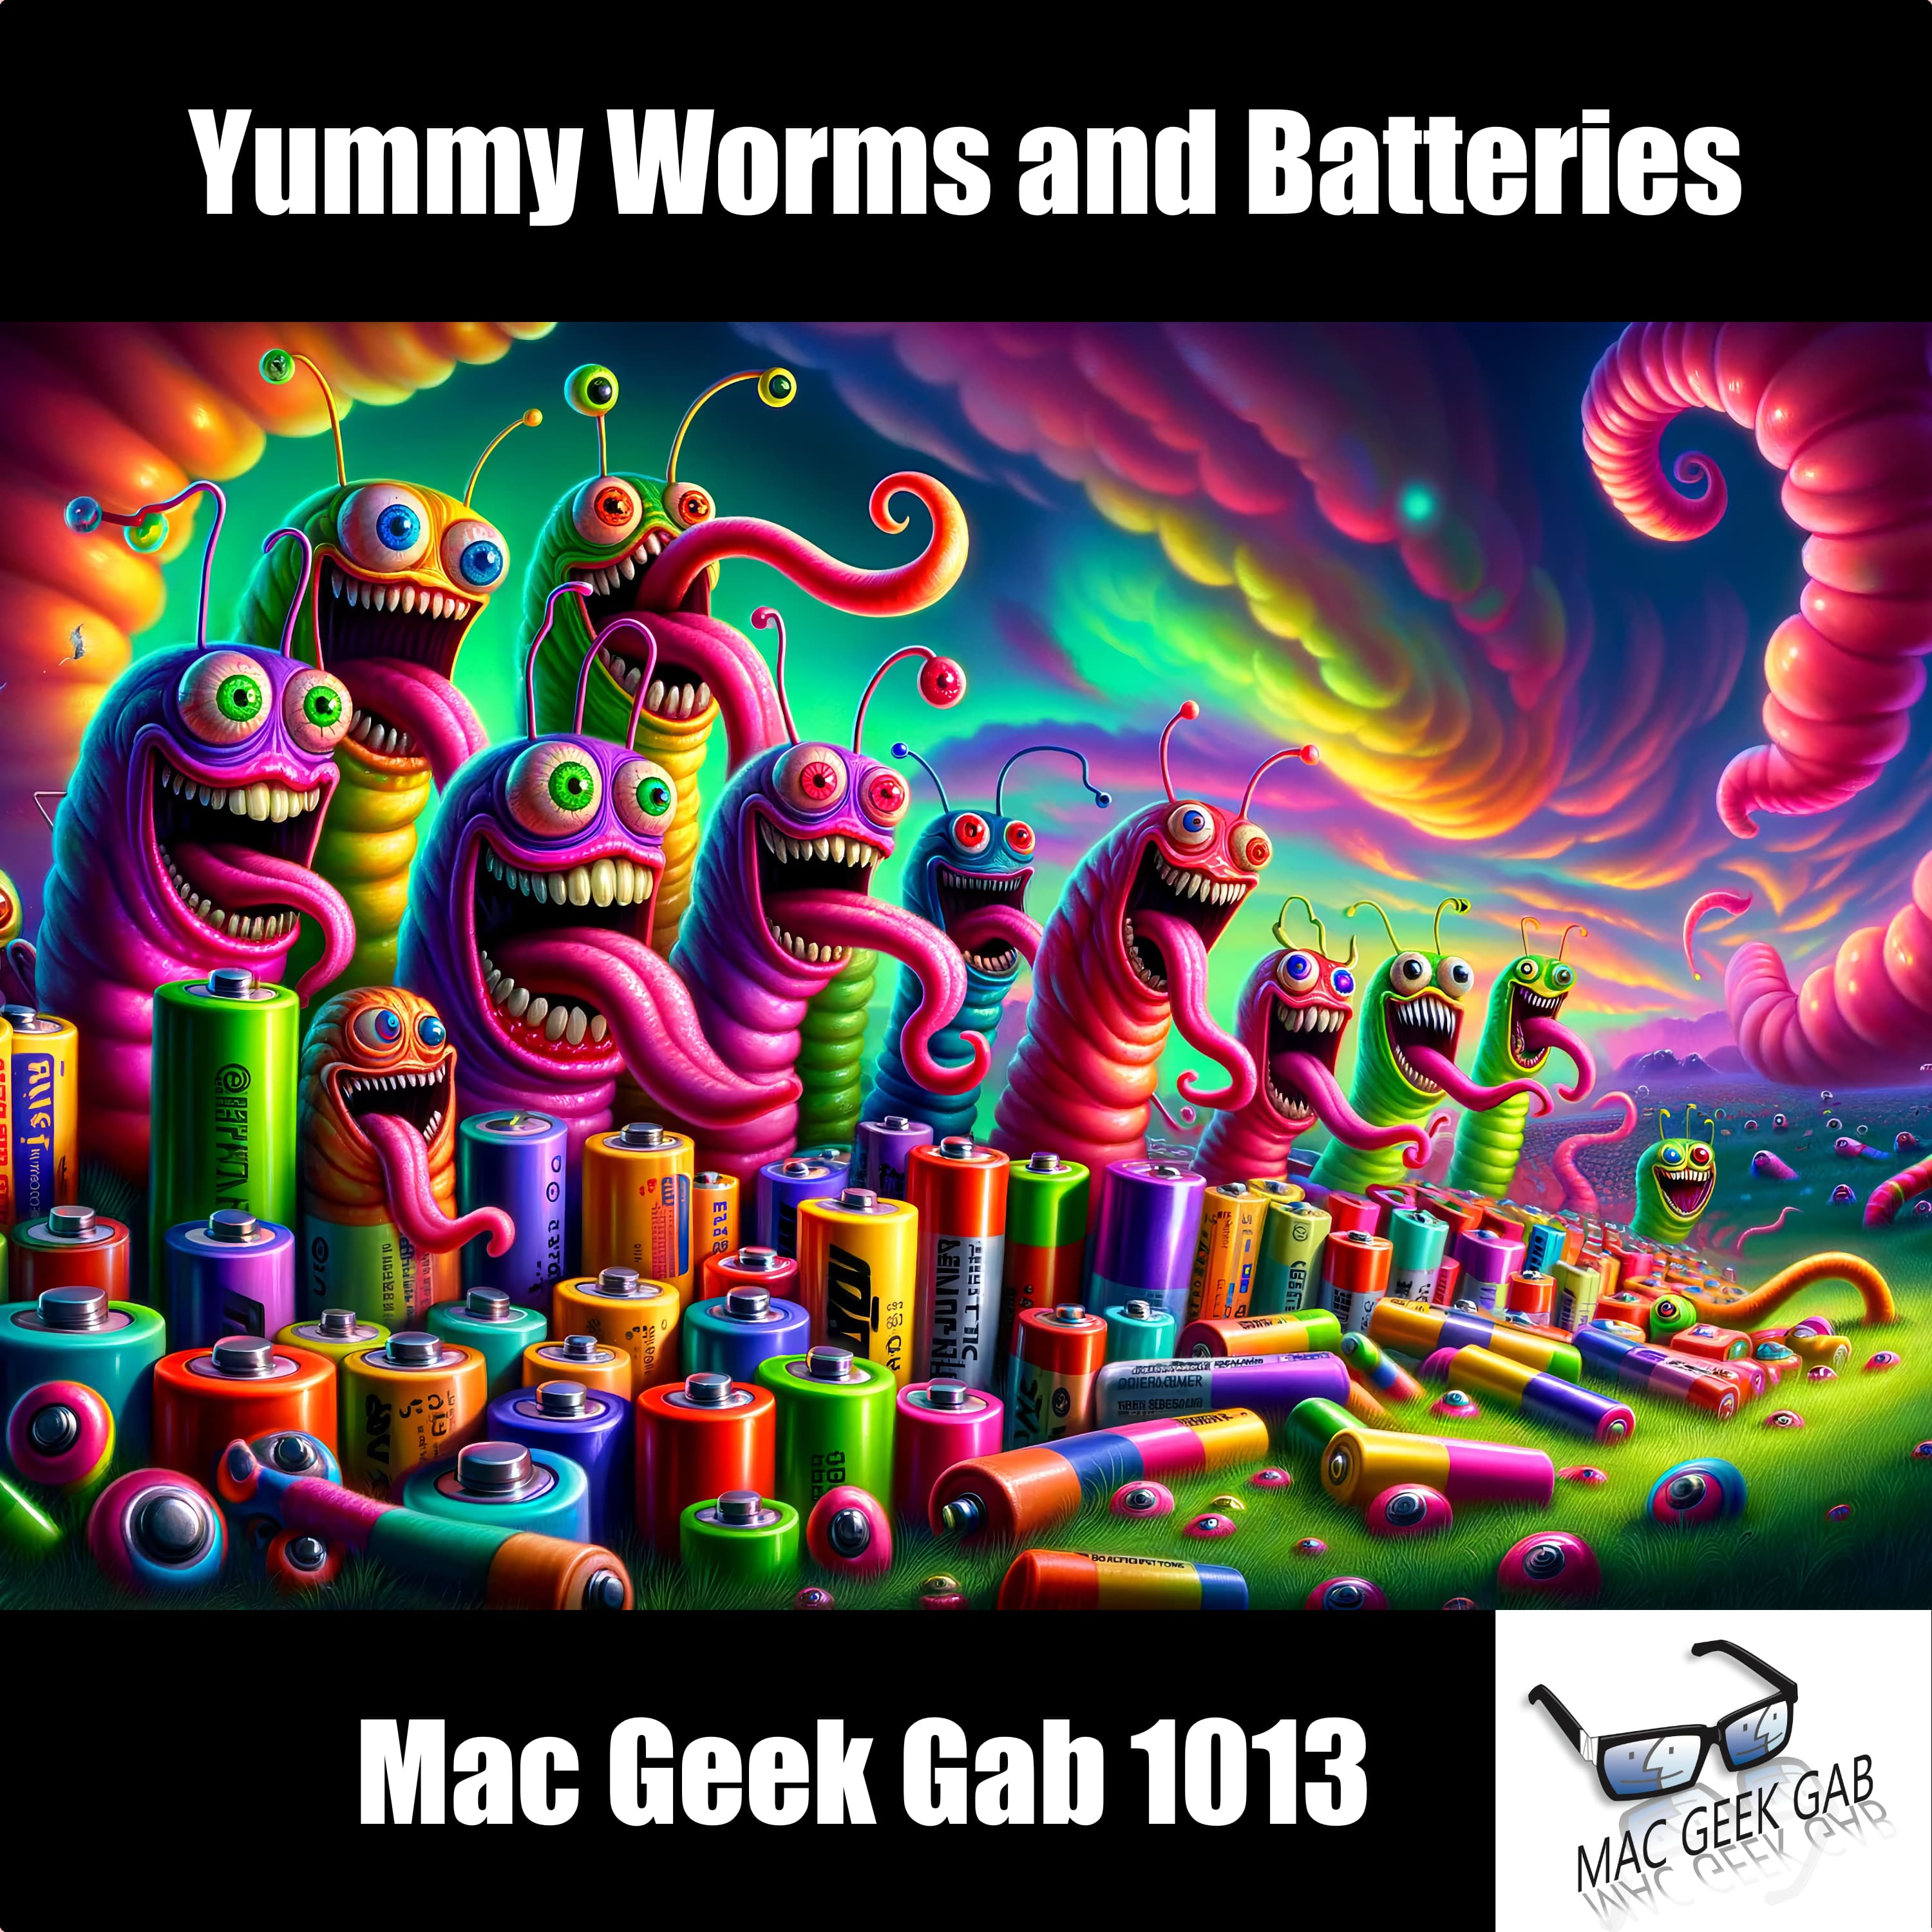 Yummy Worms and Batteries